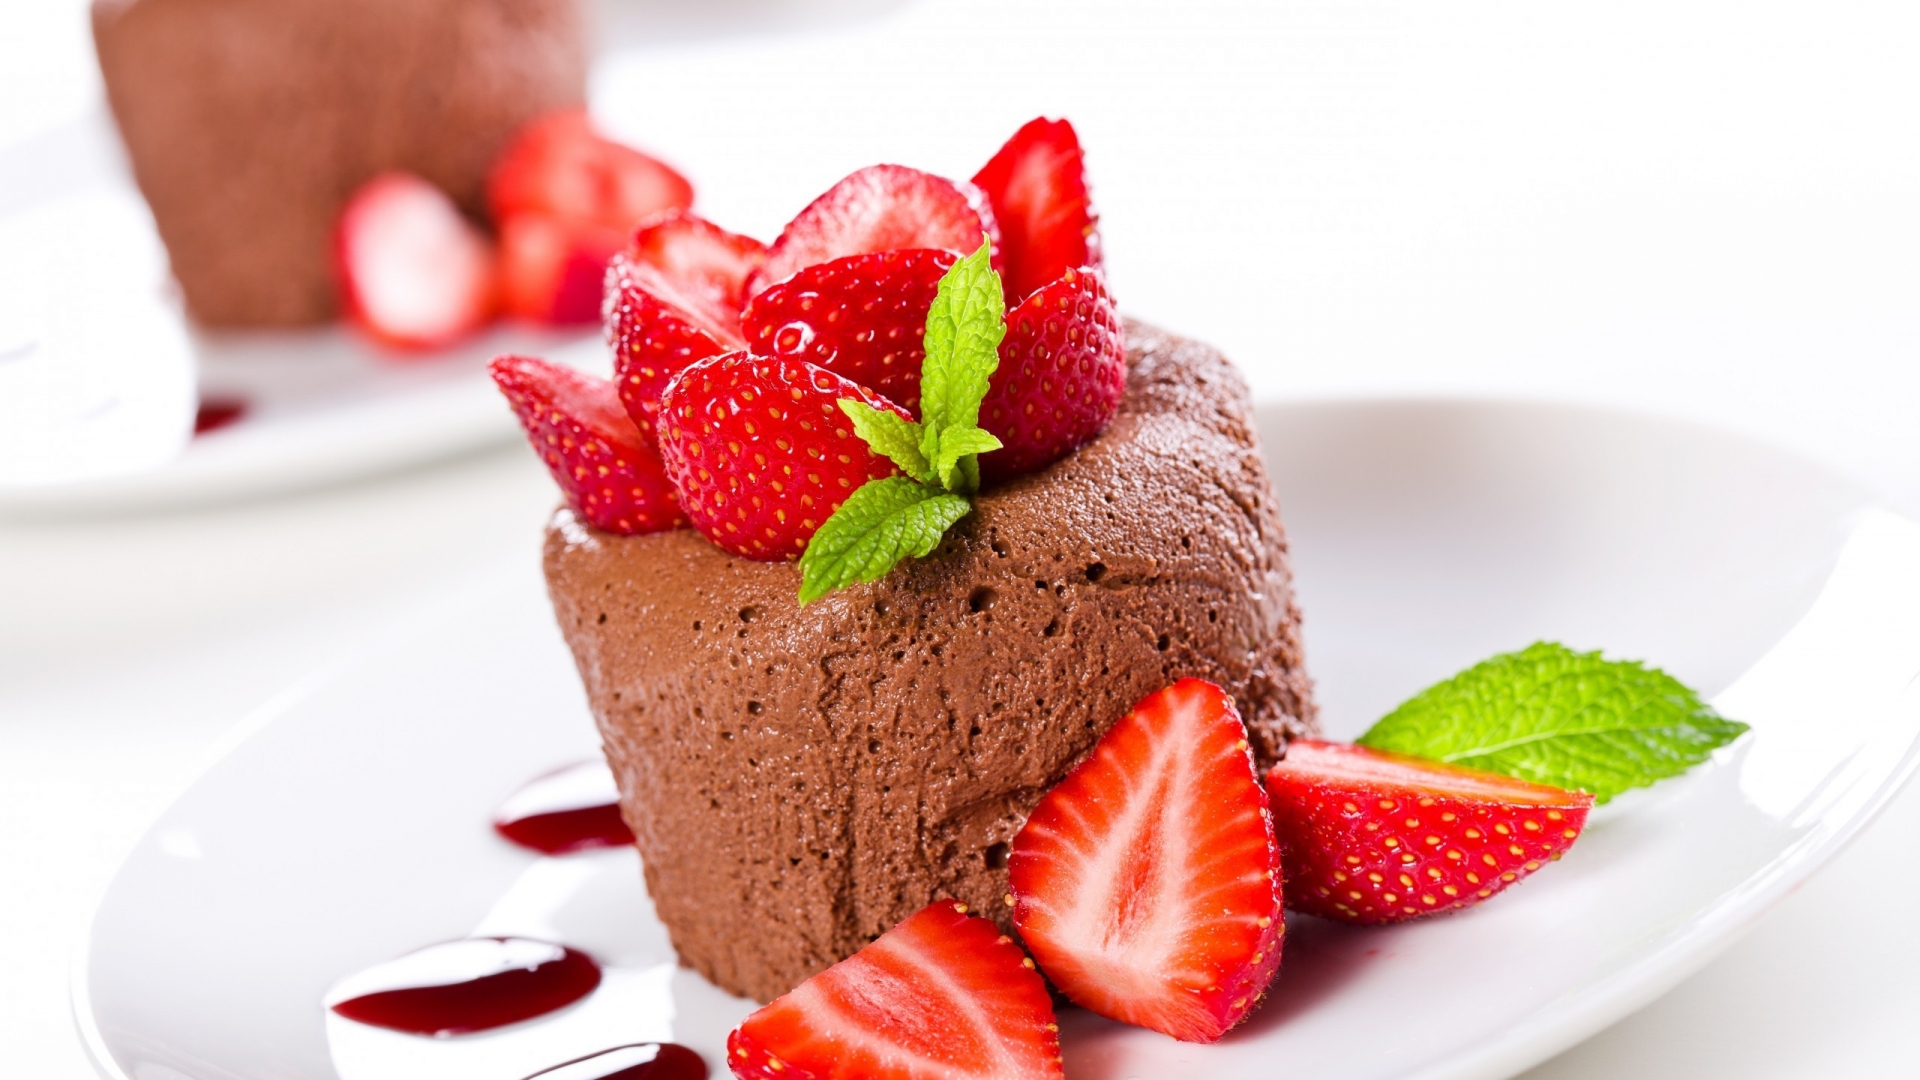 Chocolate Mousse for 1920 x 1080 HDTV 1080p resolution